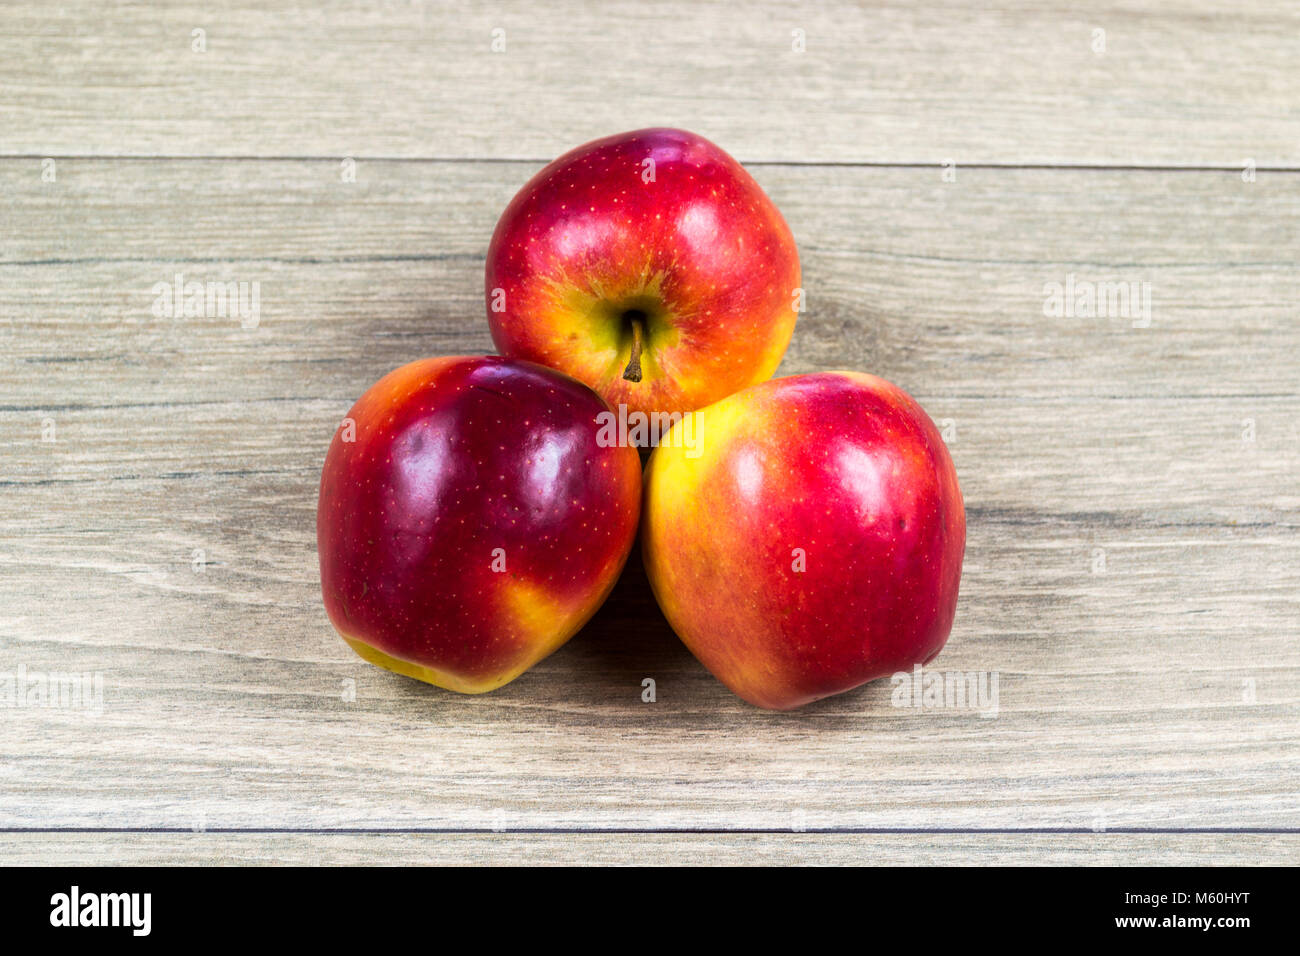 Apple as part of a diet containing vitamins Stock Photo